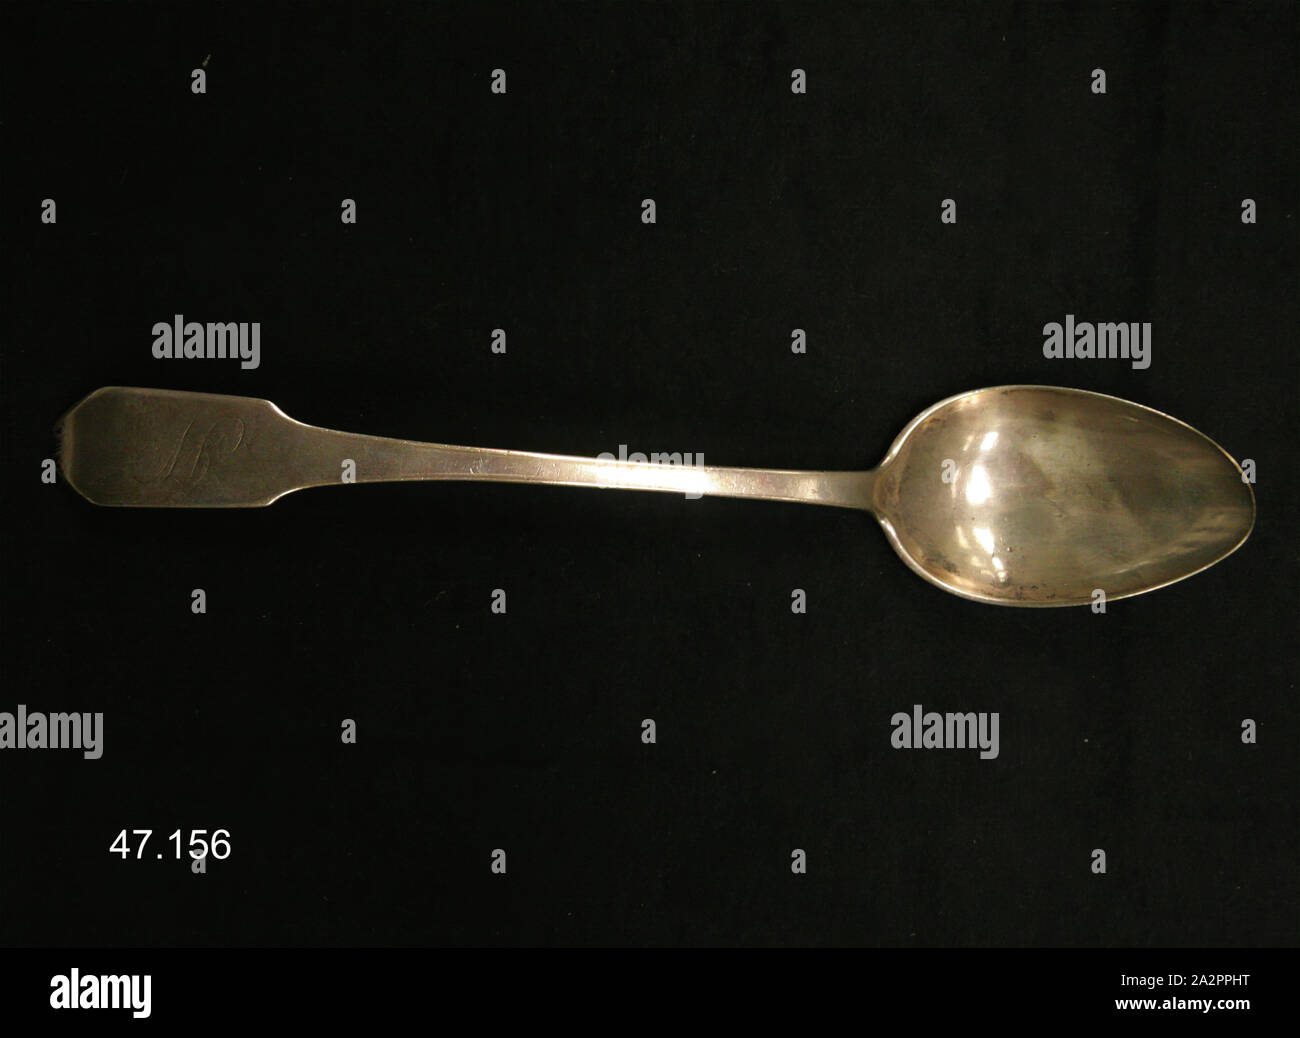 https://c8.alamy.com/comp/2A2PPHT/joseph-vessiere-american-1780-1826-tablespoon-ca-1800-silver-overall-9-12-inches-241-cm-2A2PPHT.jpg